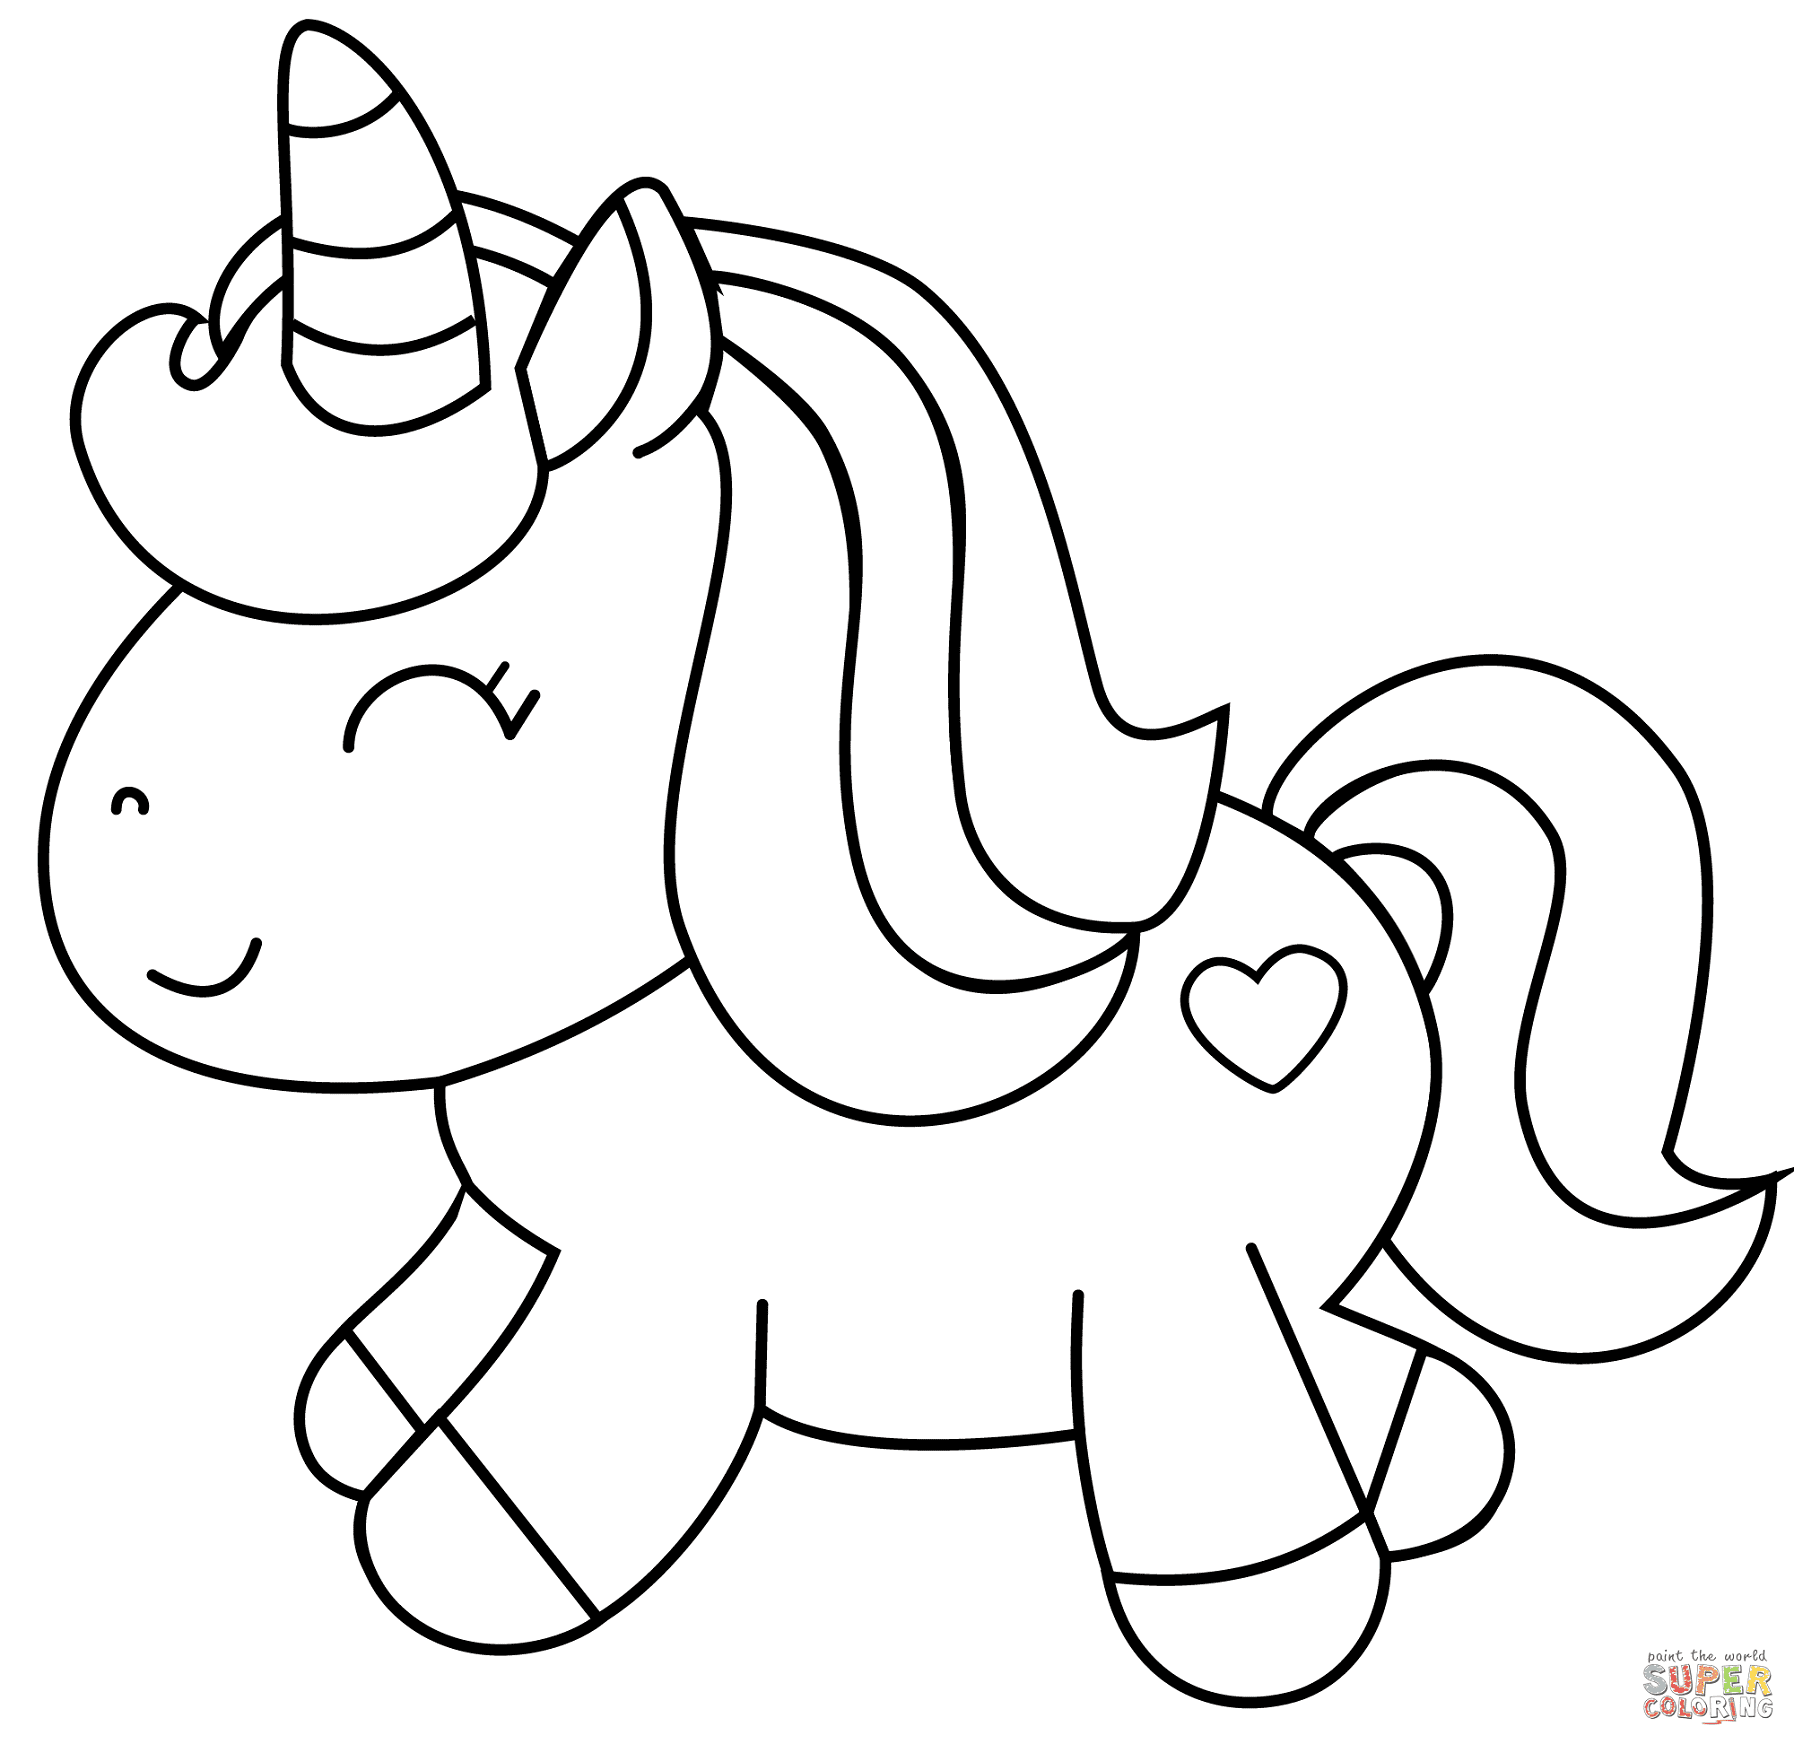 57 Coloring Sheet Cute Unicorn Coloring Pages  Best Free